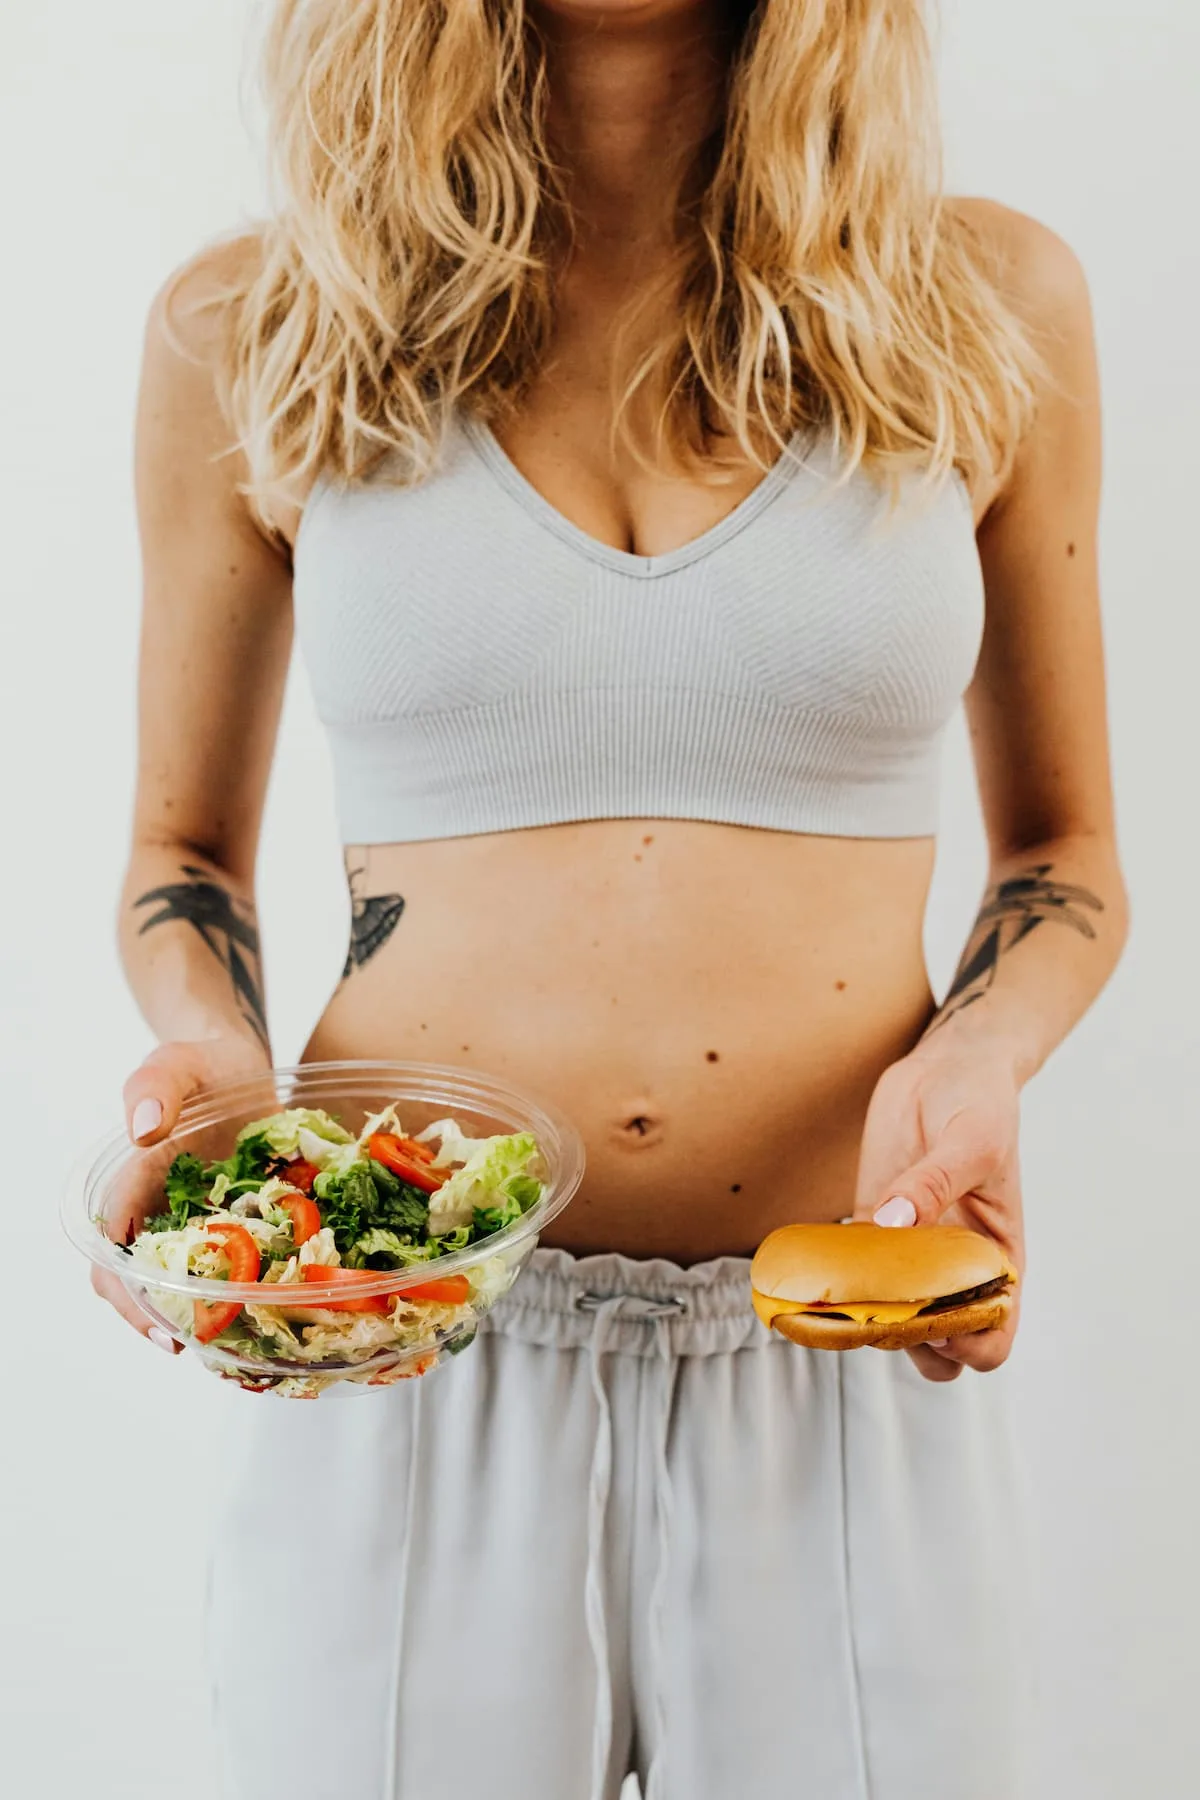 woman in sports gray bra and night pants holding salad bowl in one hand and burger in other hand Ultra Processed Foods and Weight Gain